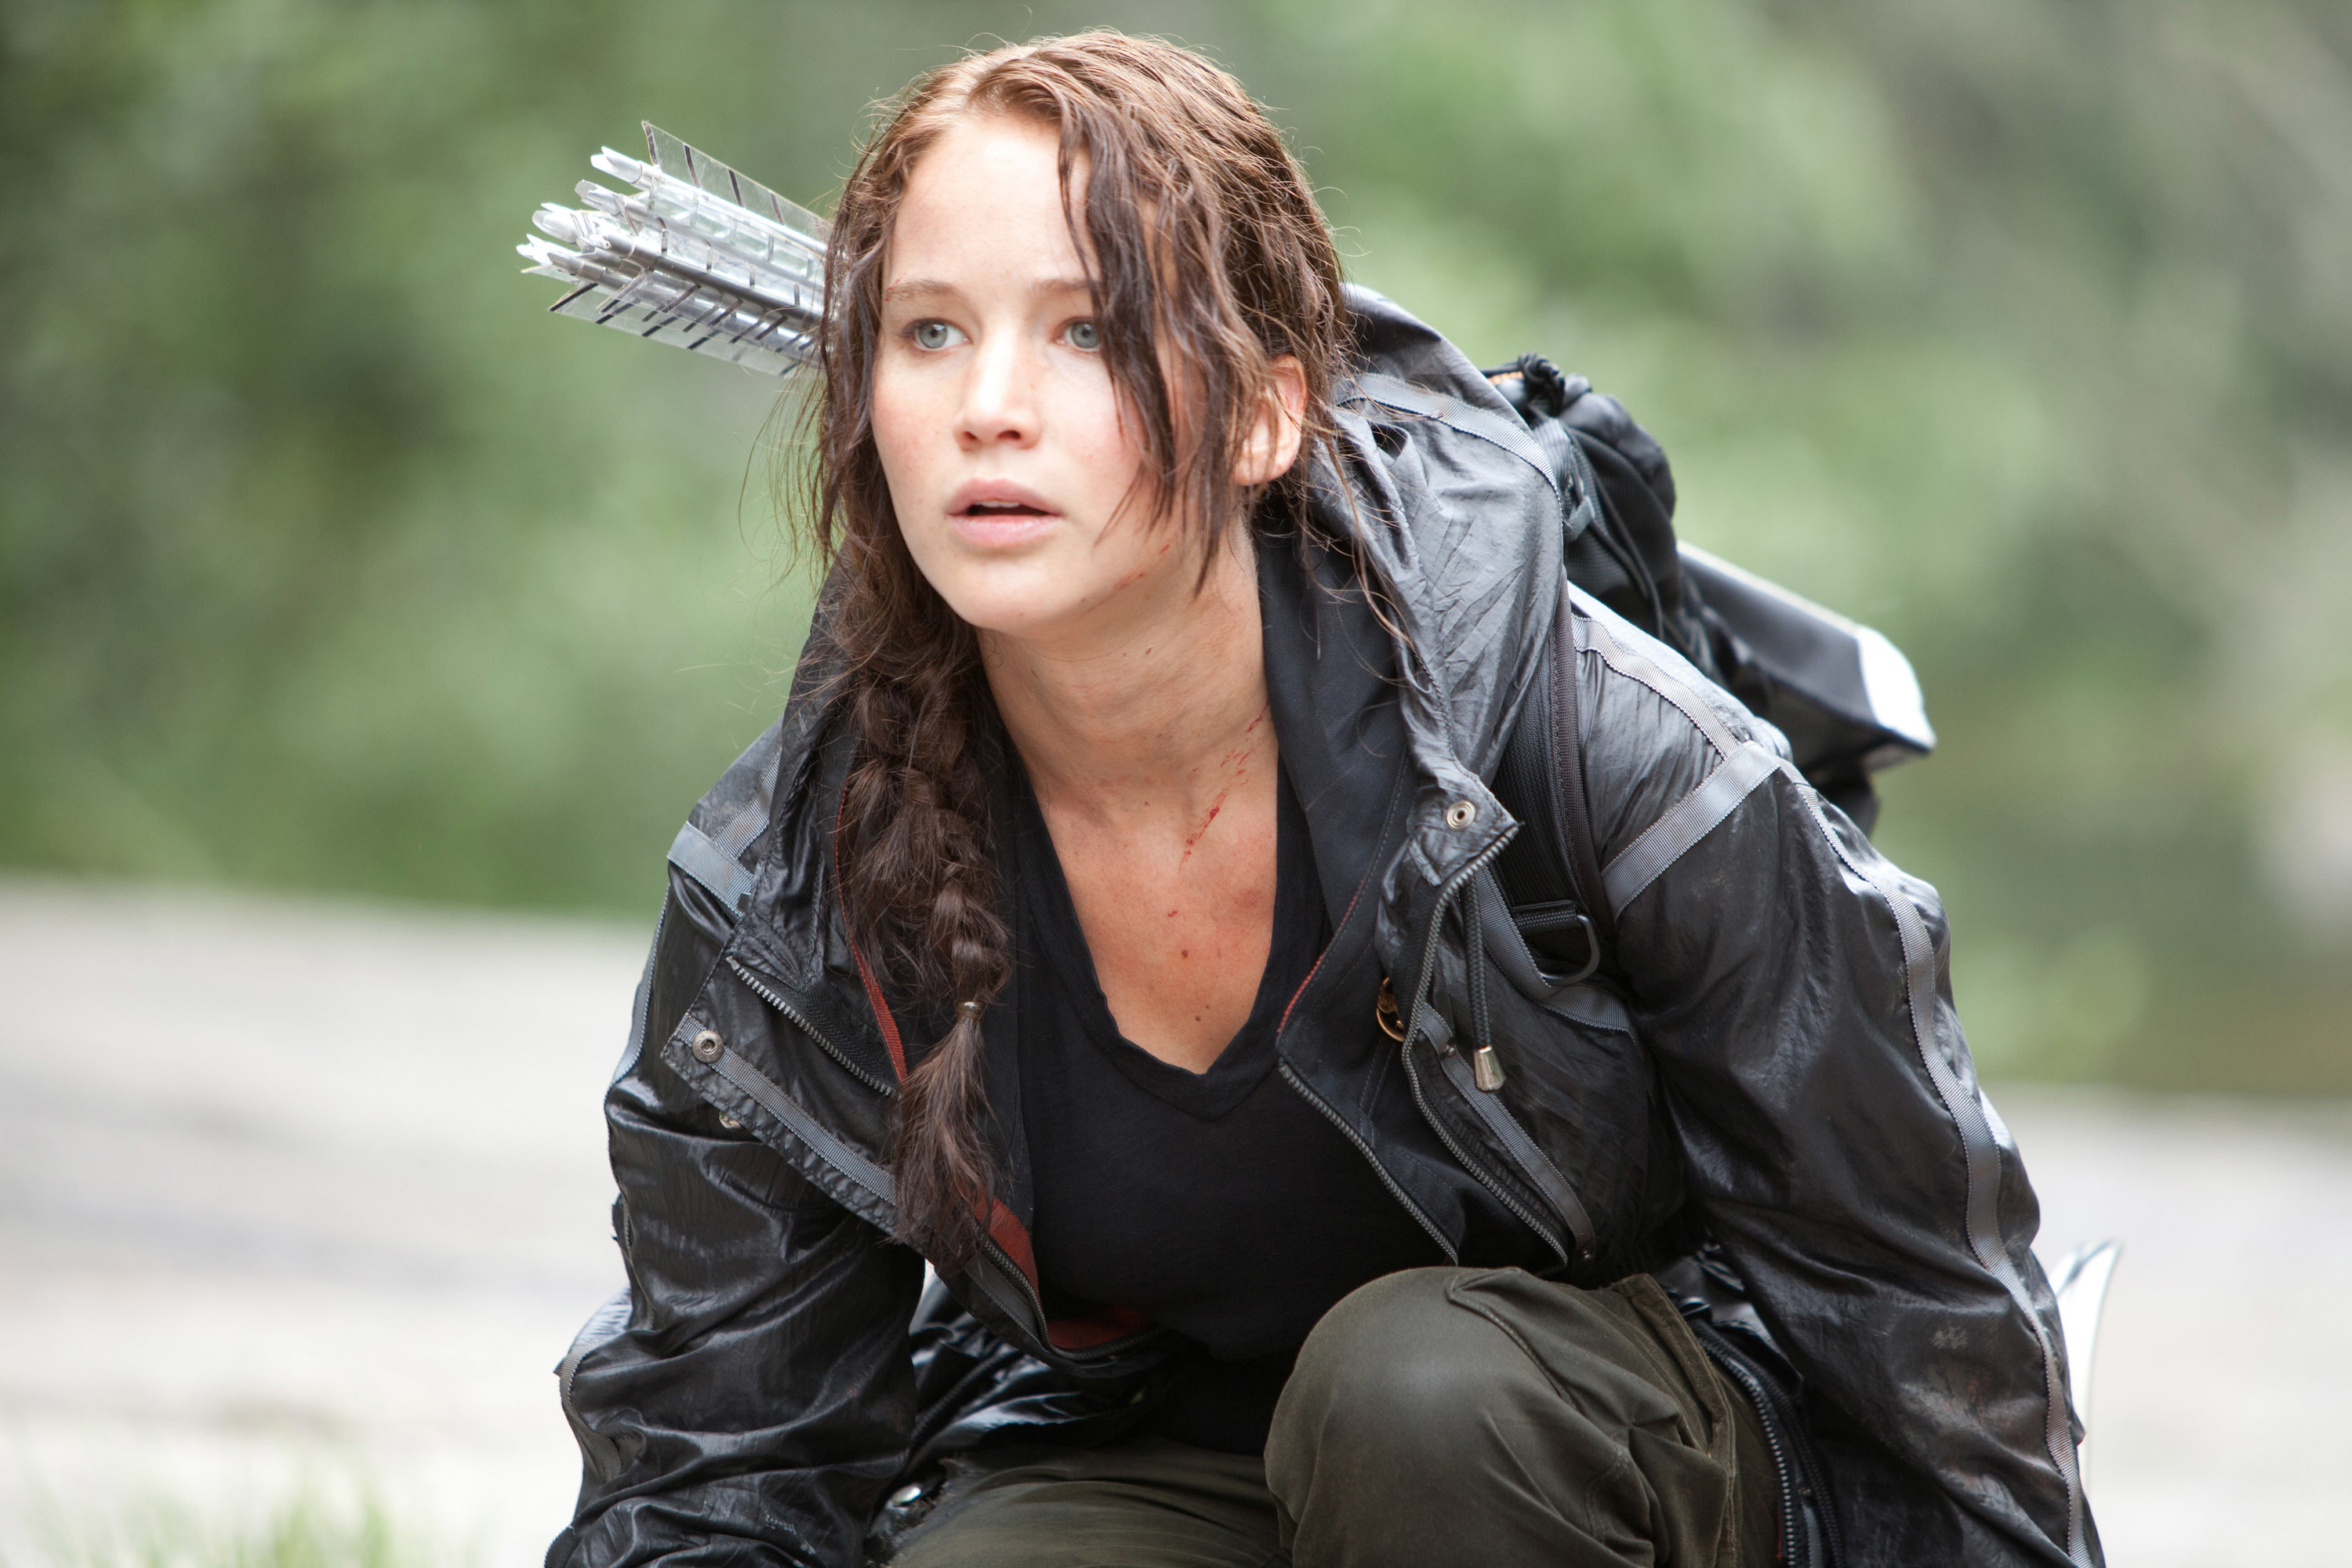 Katniss hunched and armed